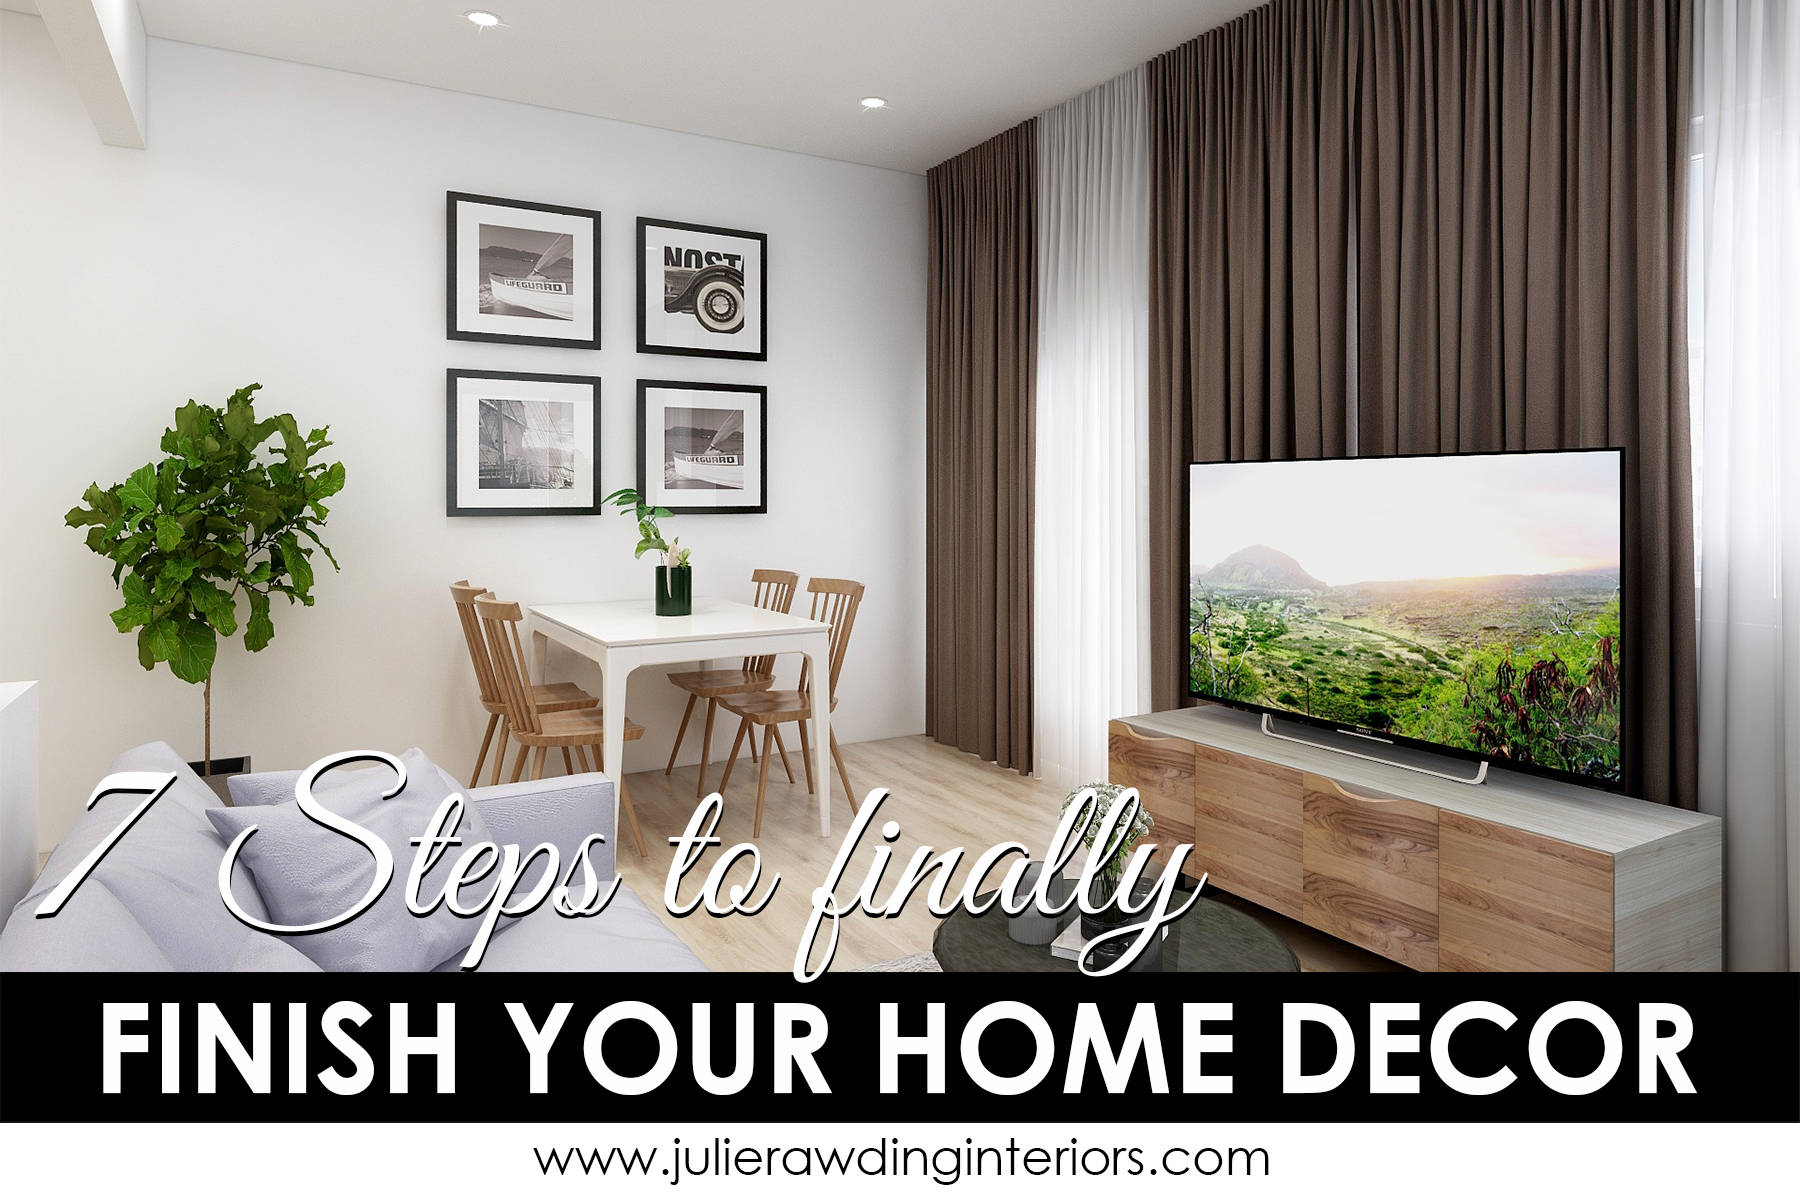 Find A Quick Way To Finish Your Home Decor